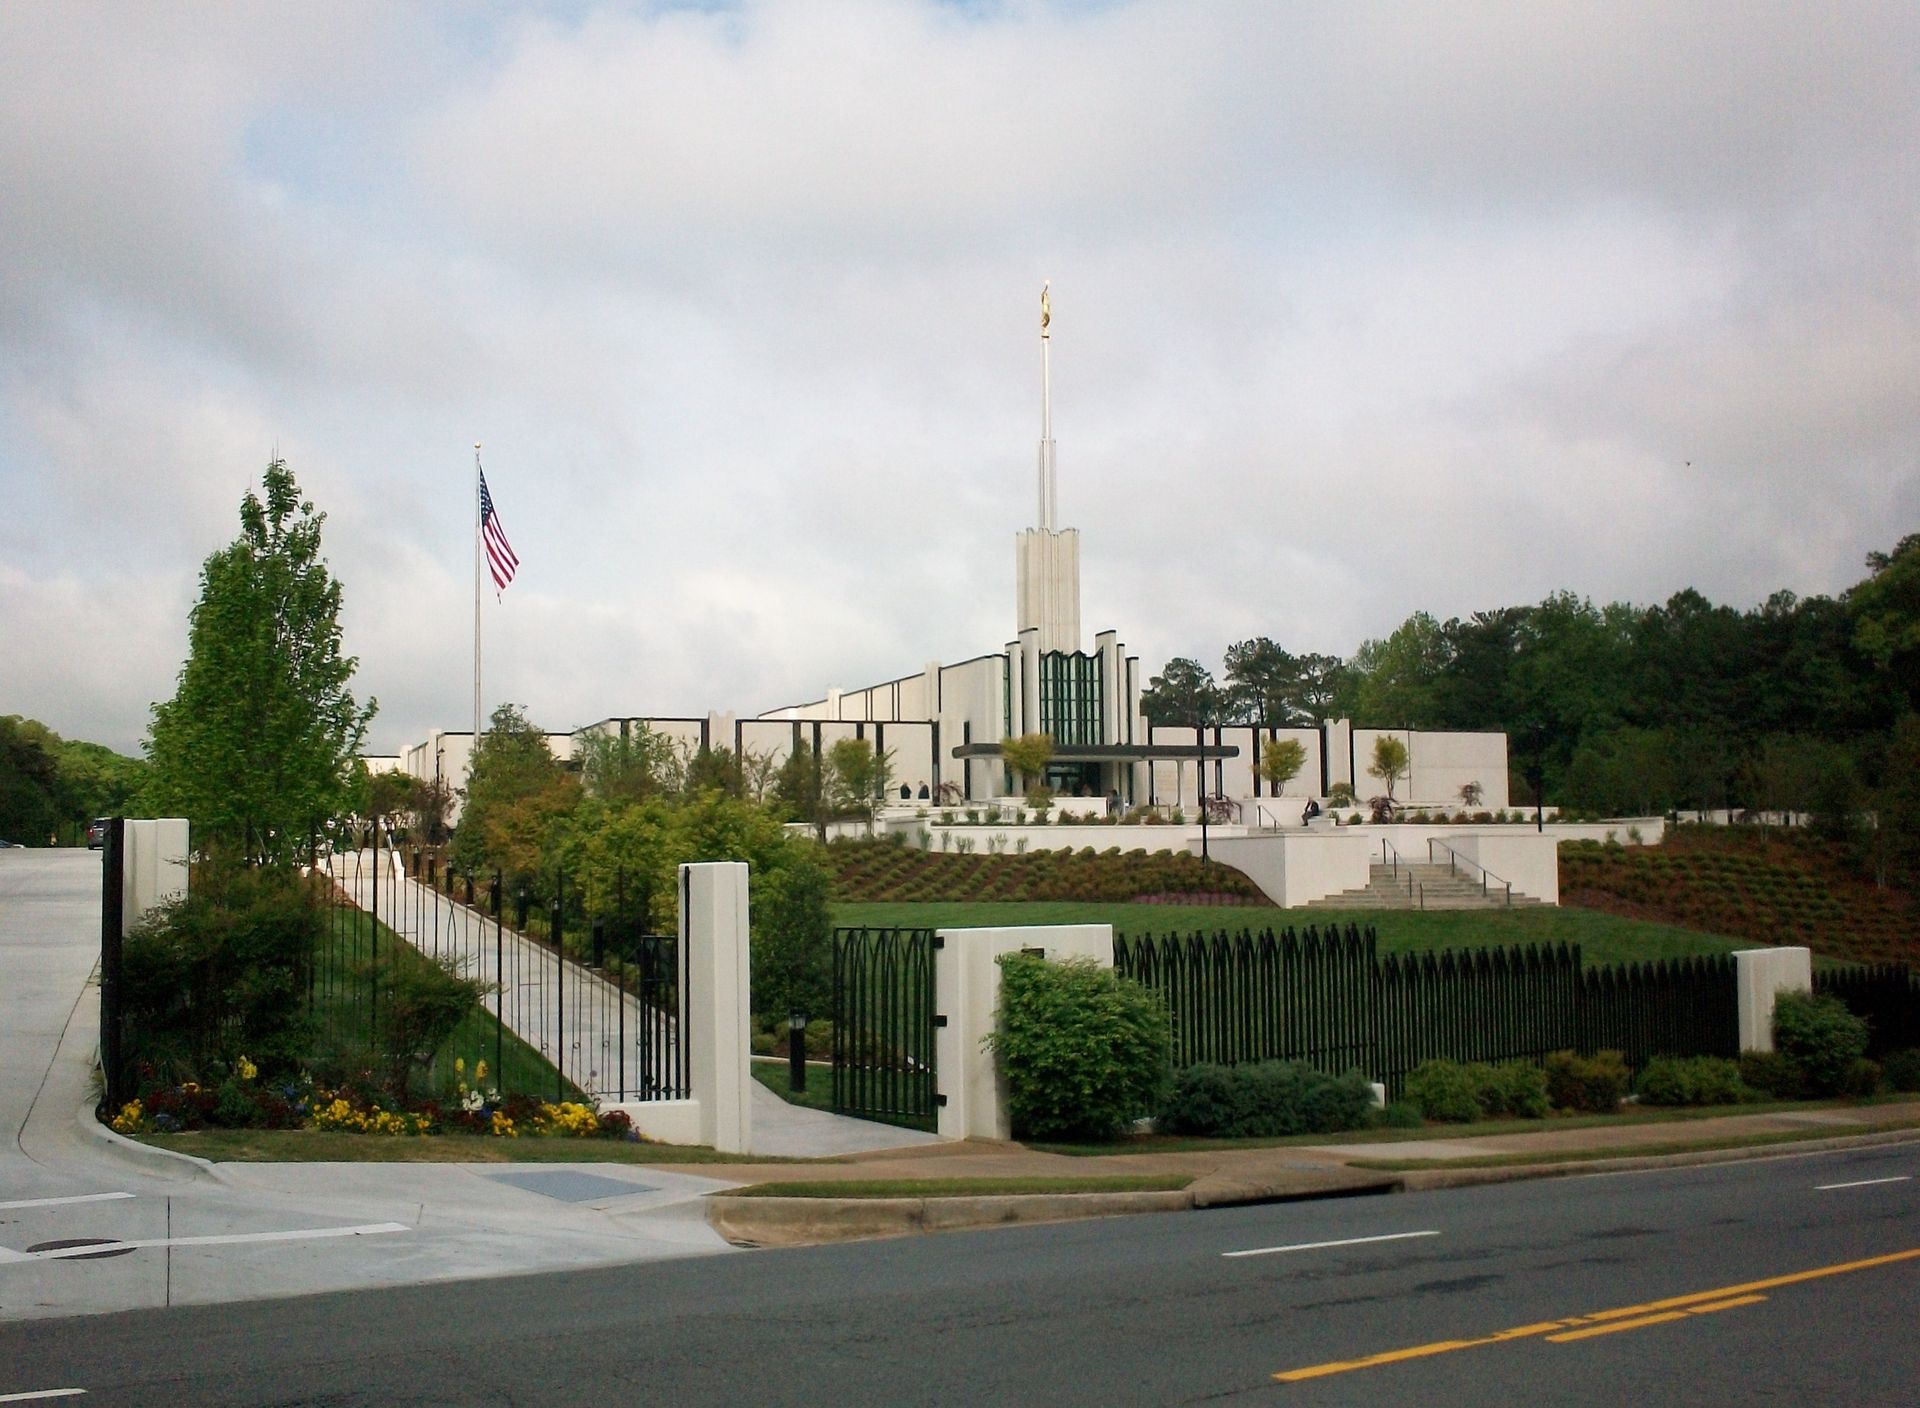 A view of the Atlanta Georgia Temple and grounds from the street.